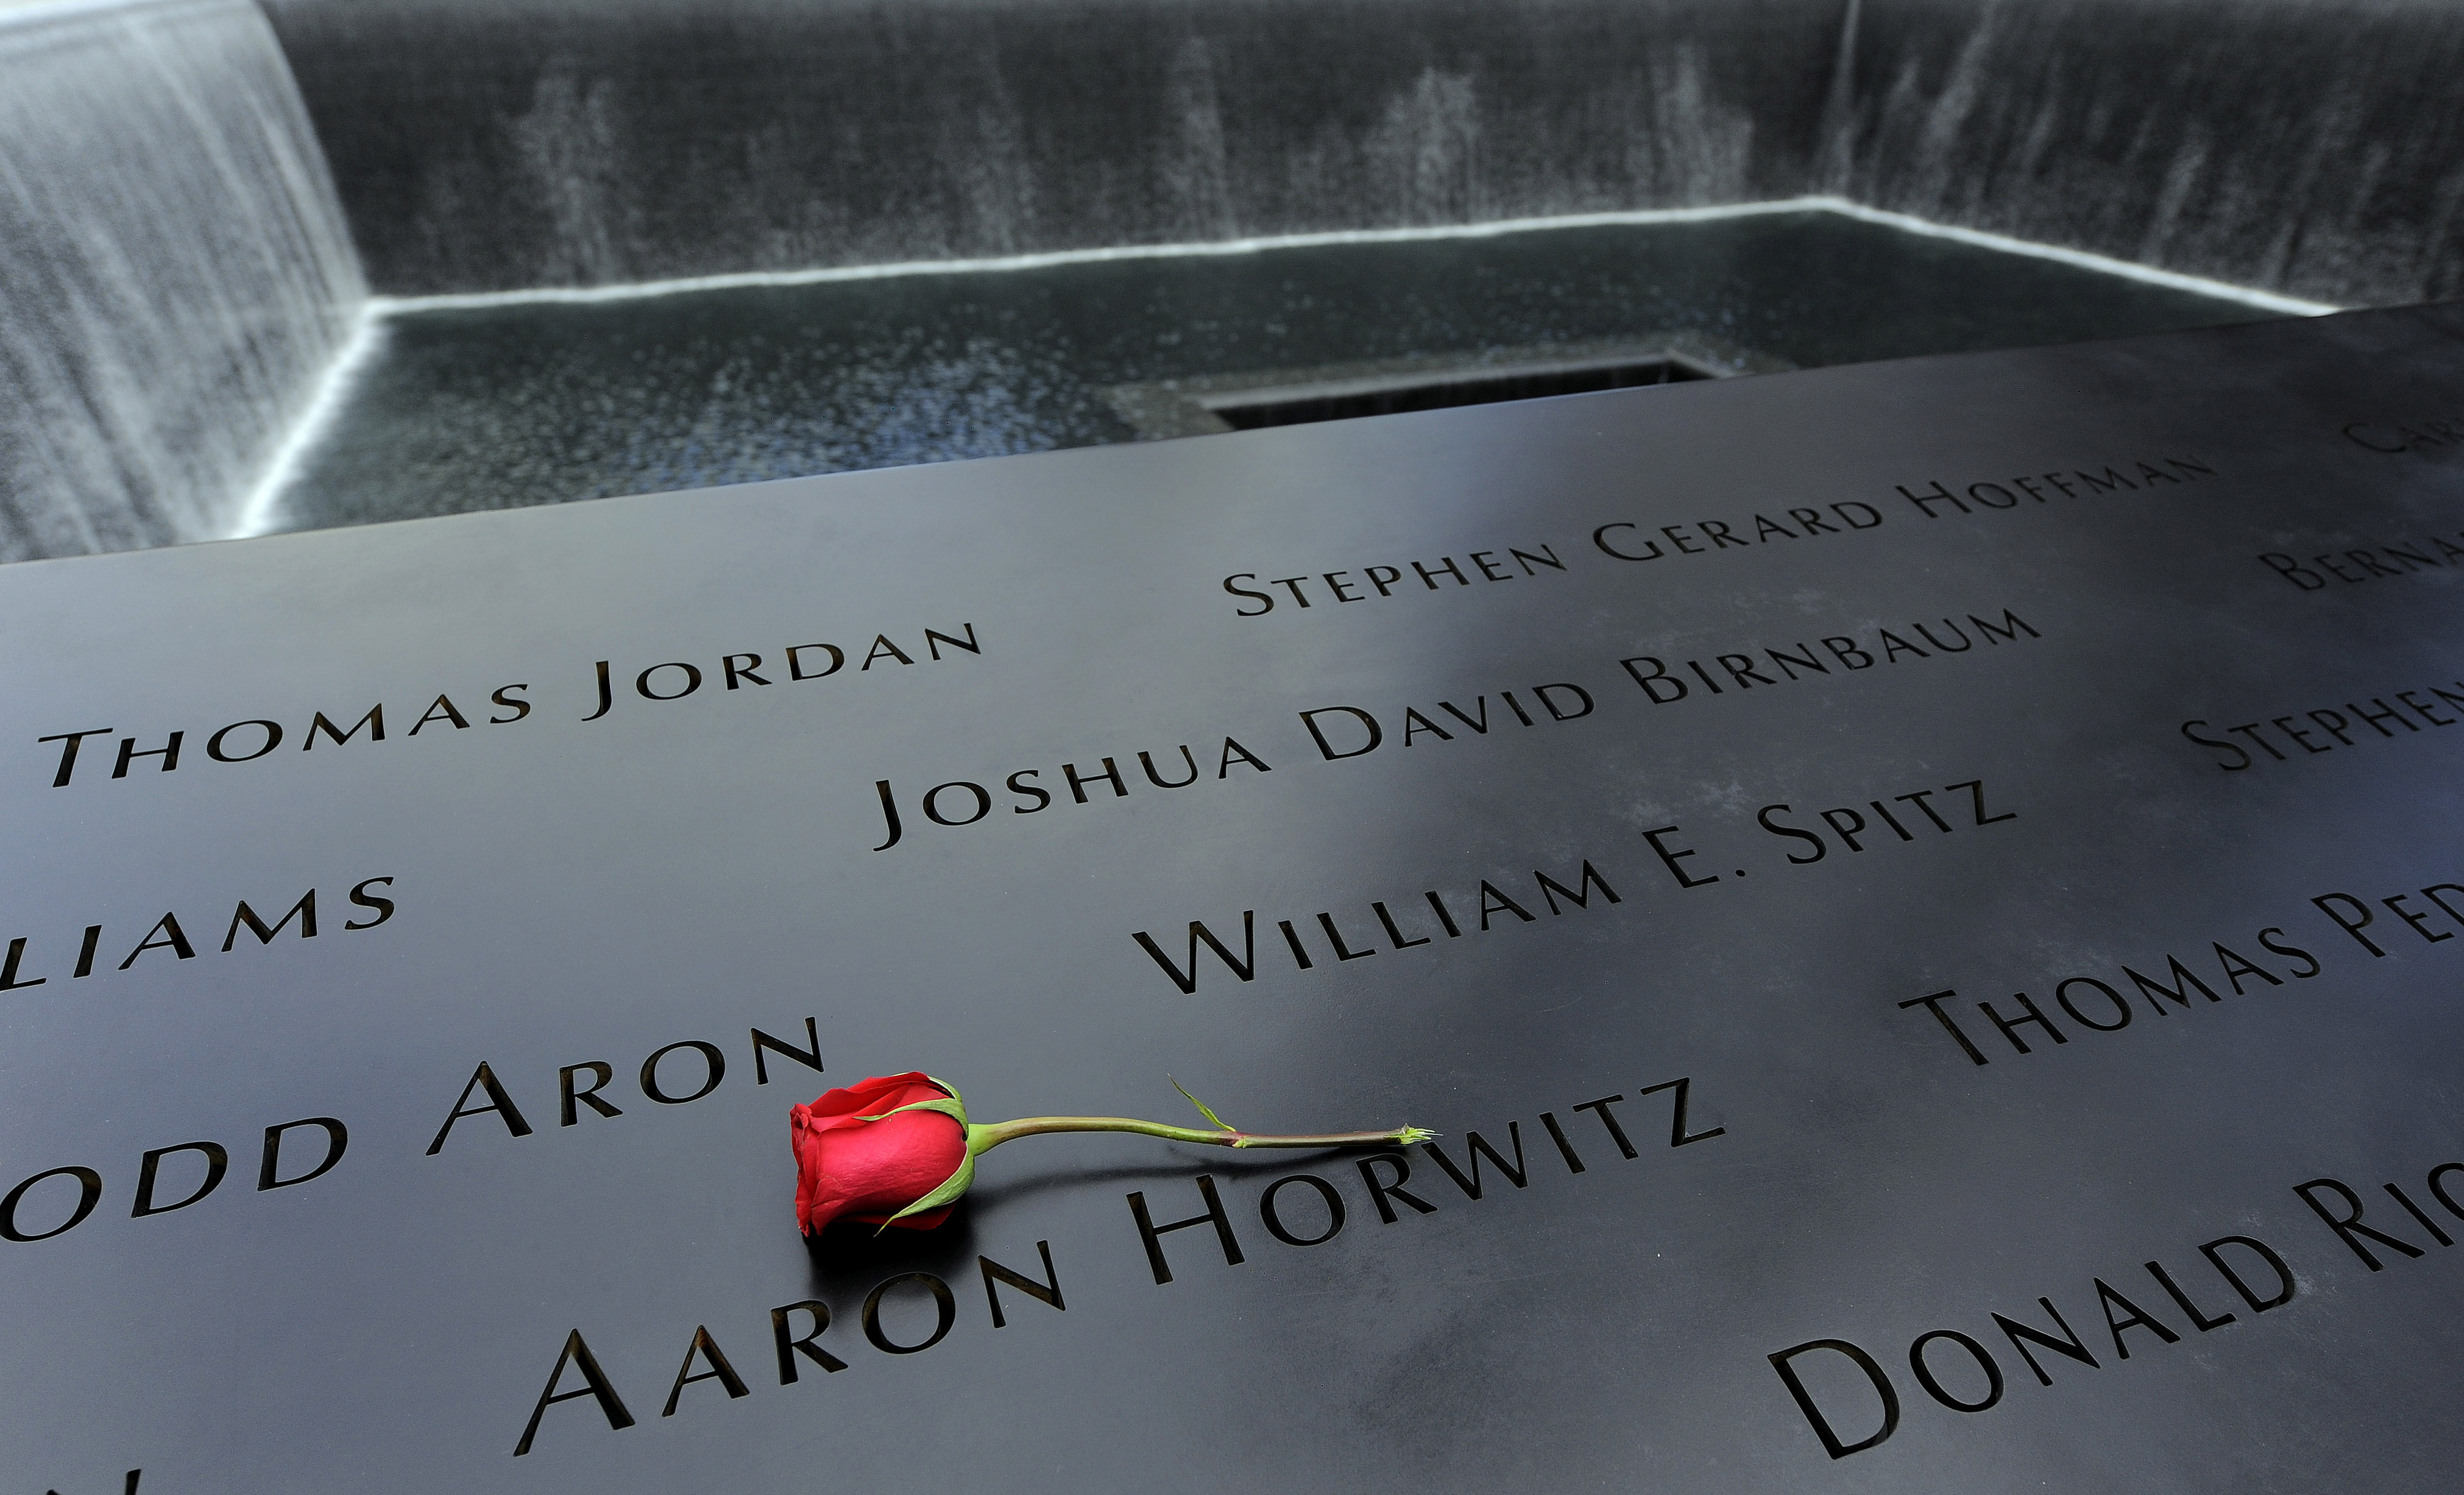 A rose is placed on the names inscribed around the North Pool of the 9/11 Memorial during tenth anniversary ceremonies at the site of the World Trade Center in New York on Sept. 11, 2011.